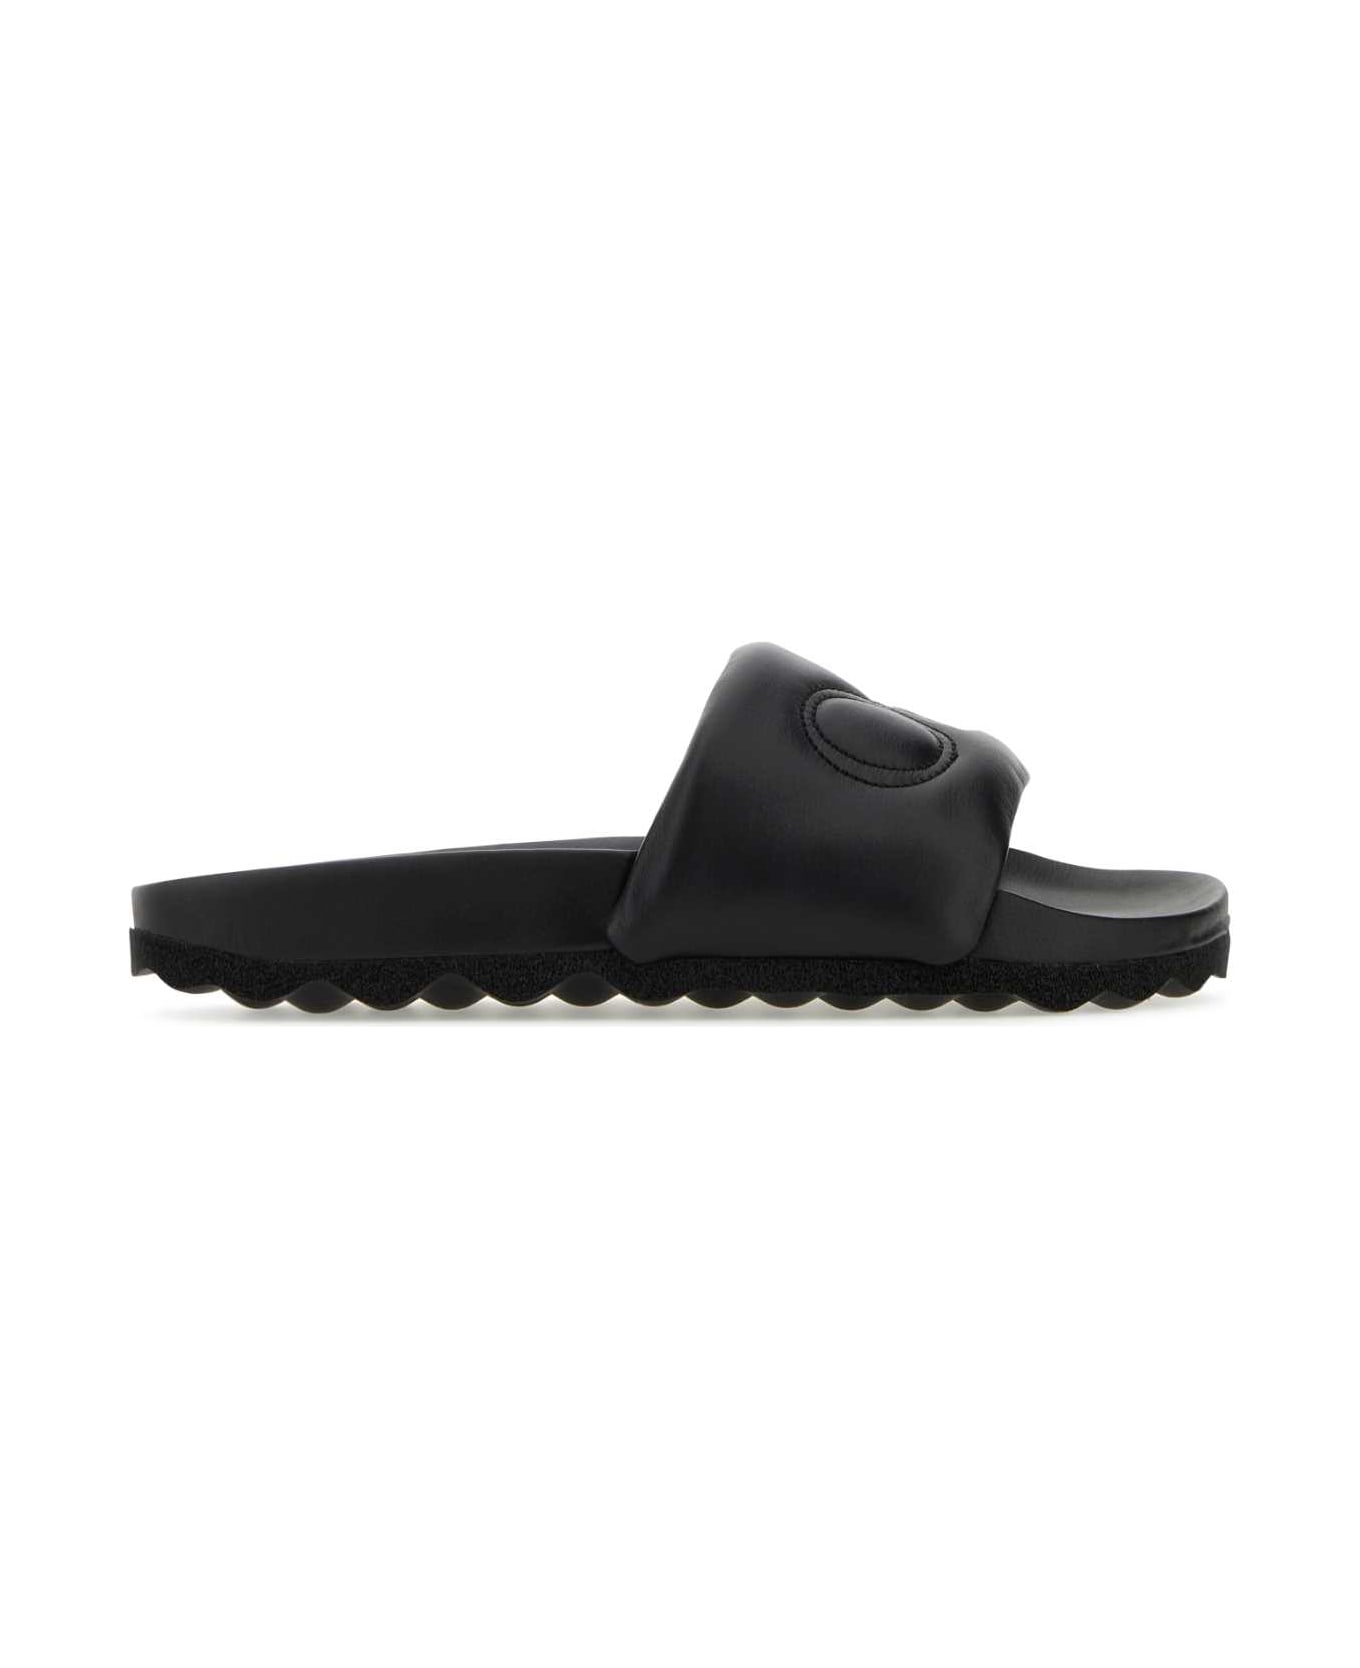 Off-White Black Leather Bookish Slippers - Black